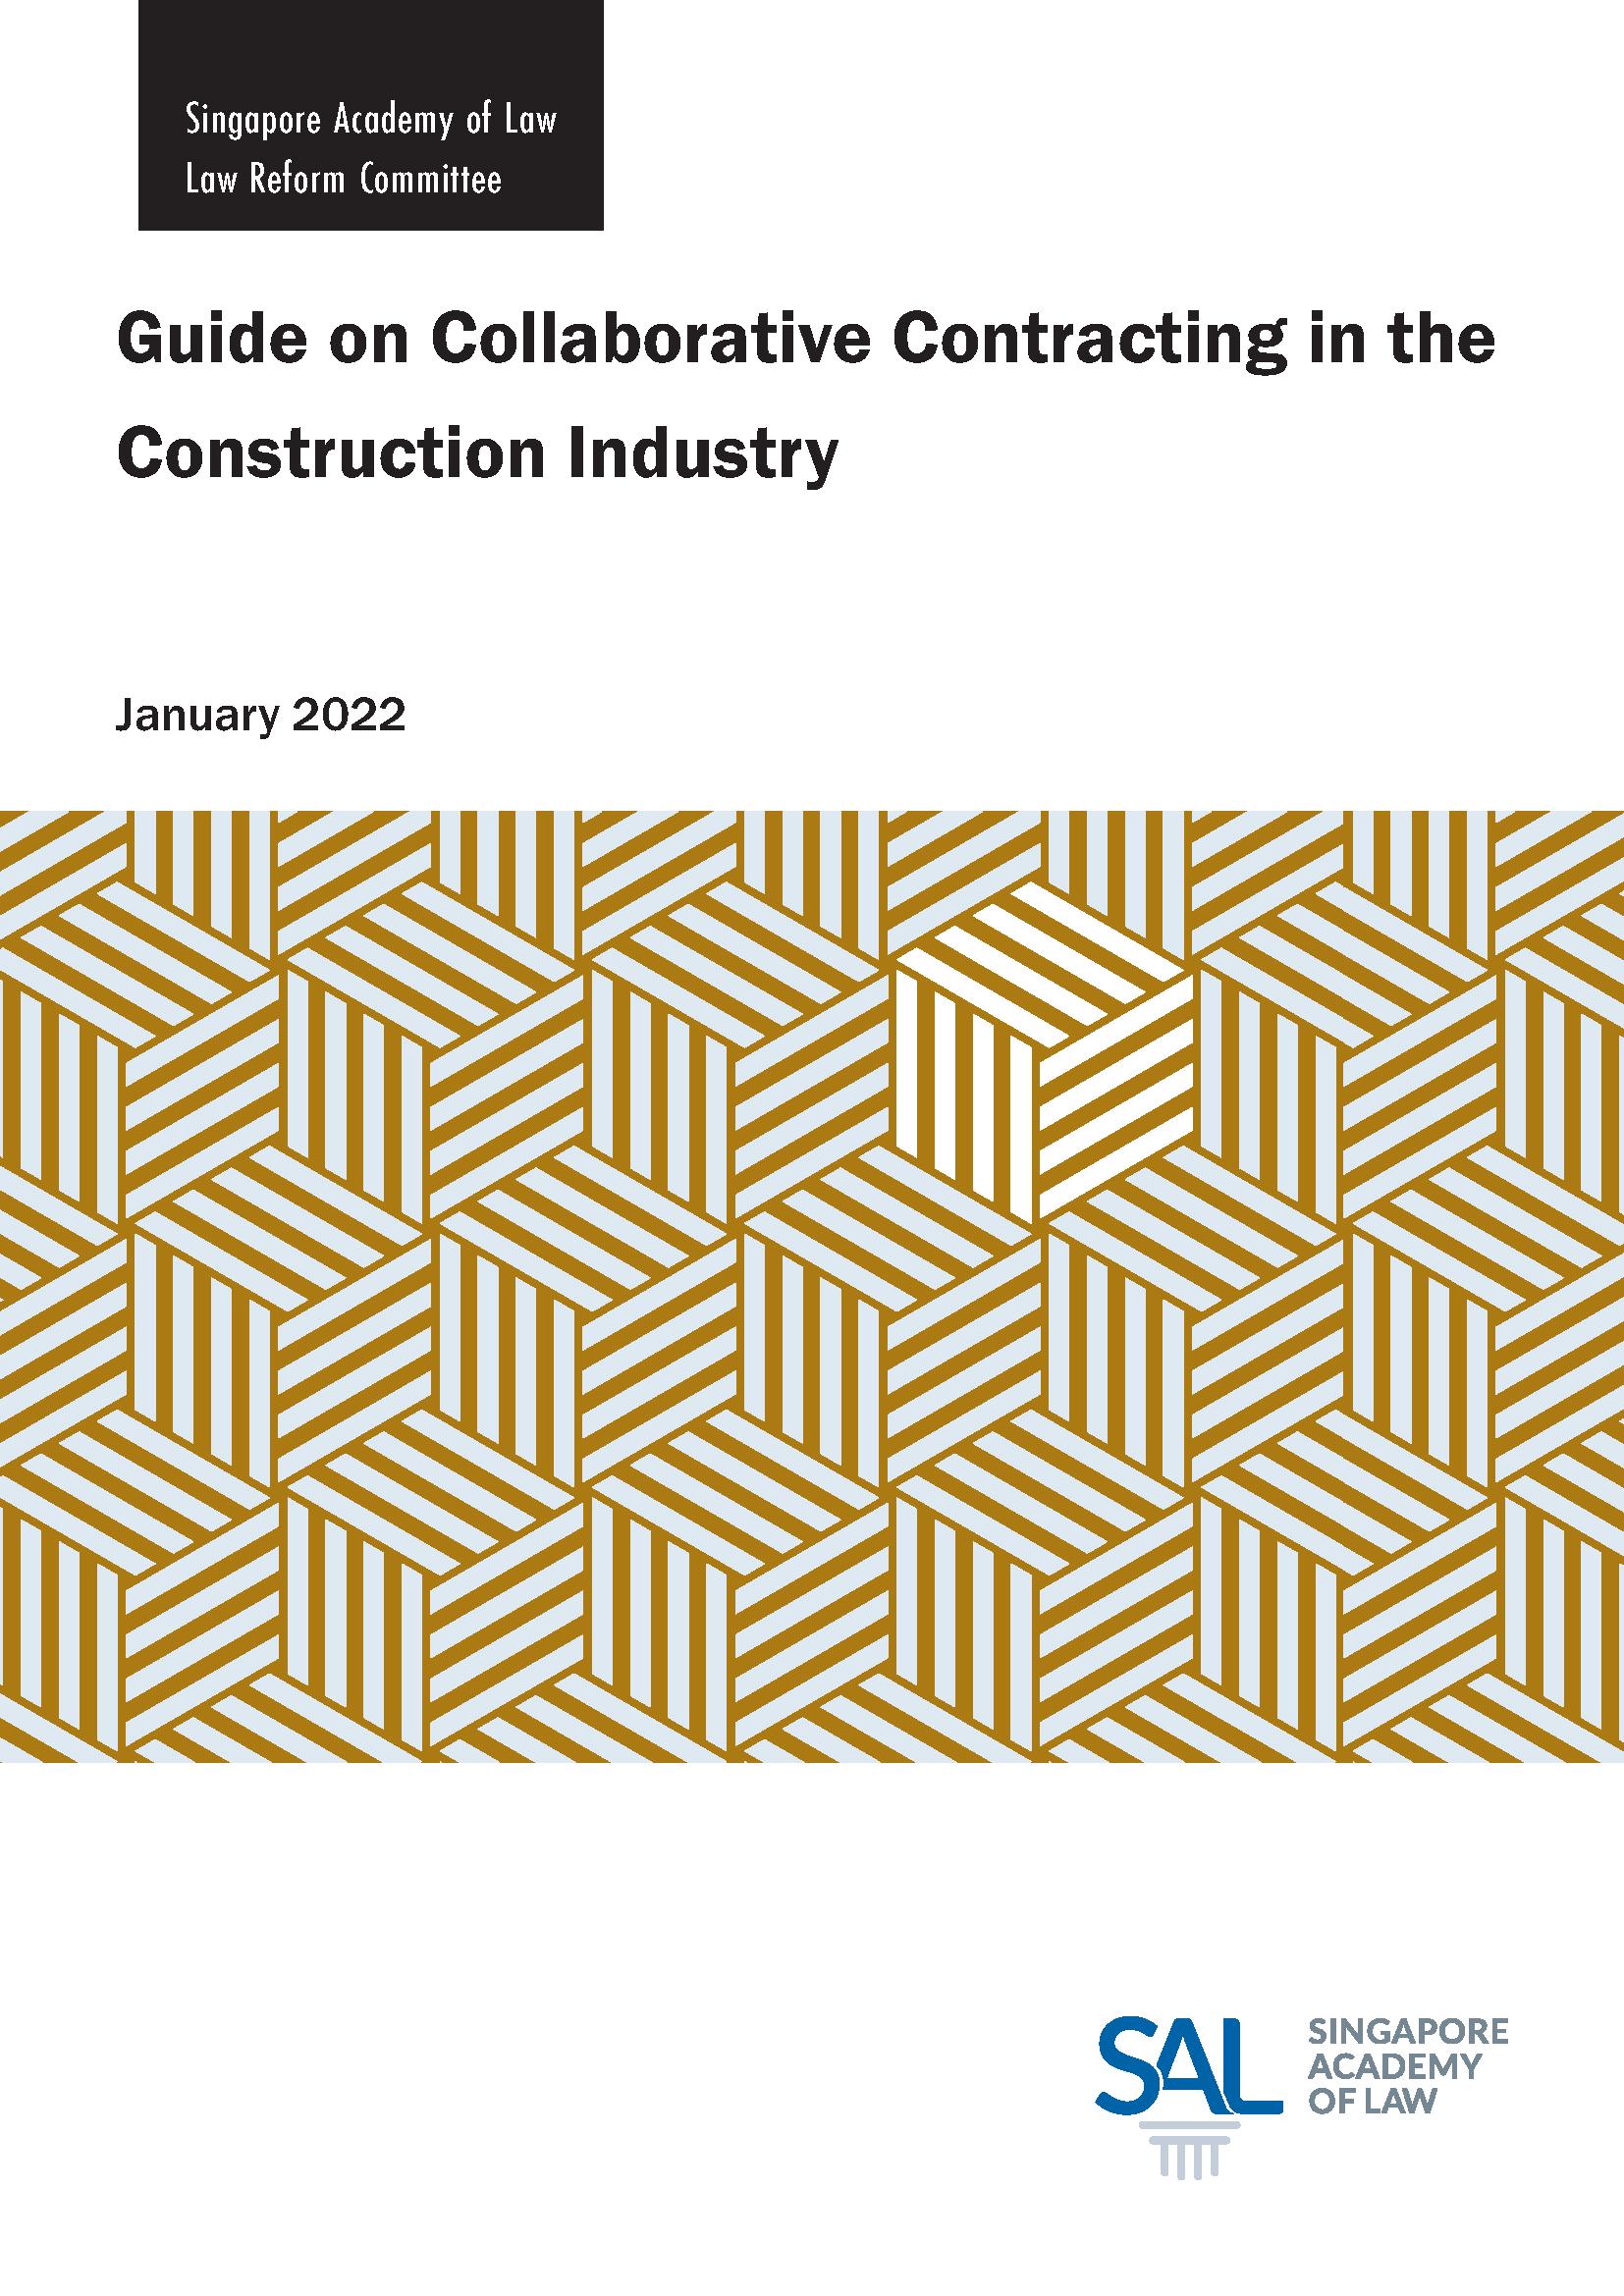 Guide on Collaborative Contracting in the Construction Industry